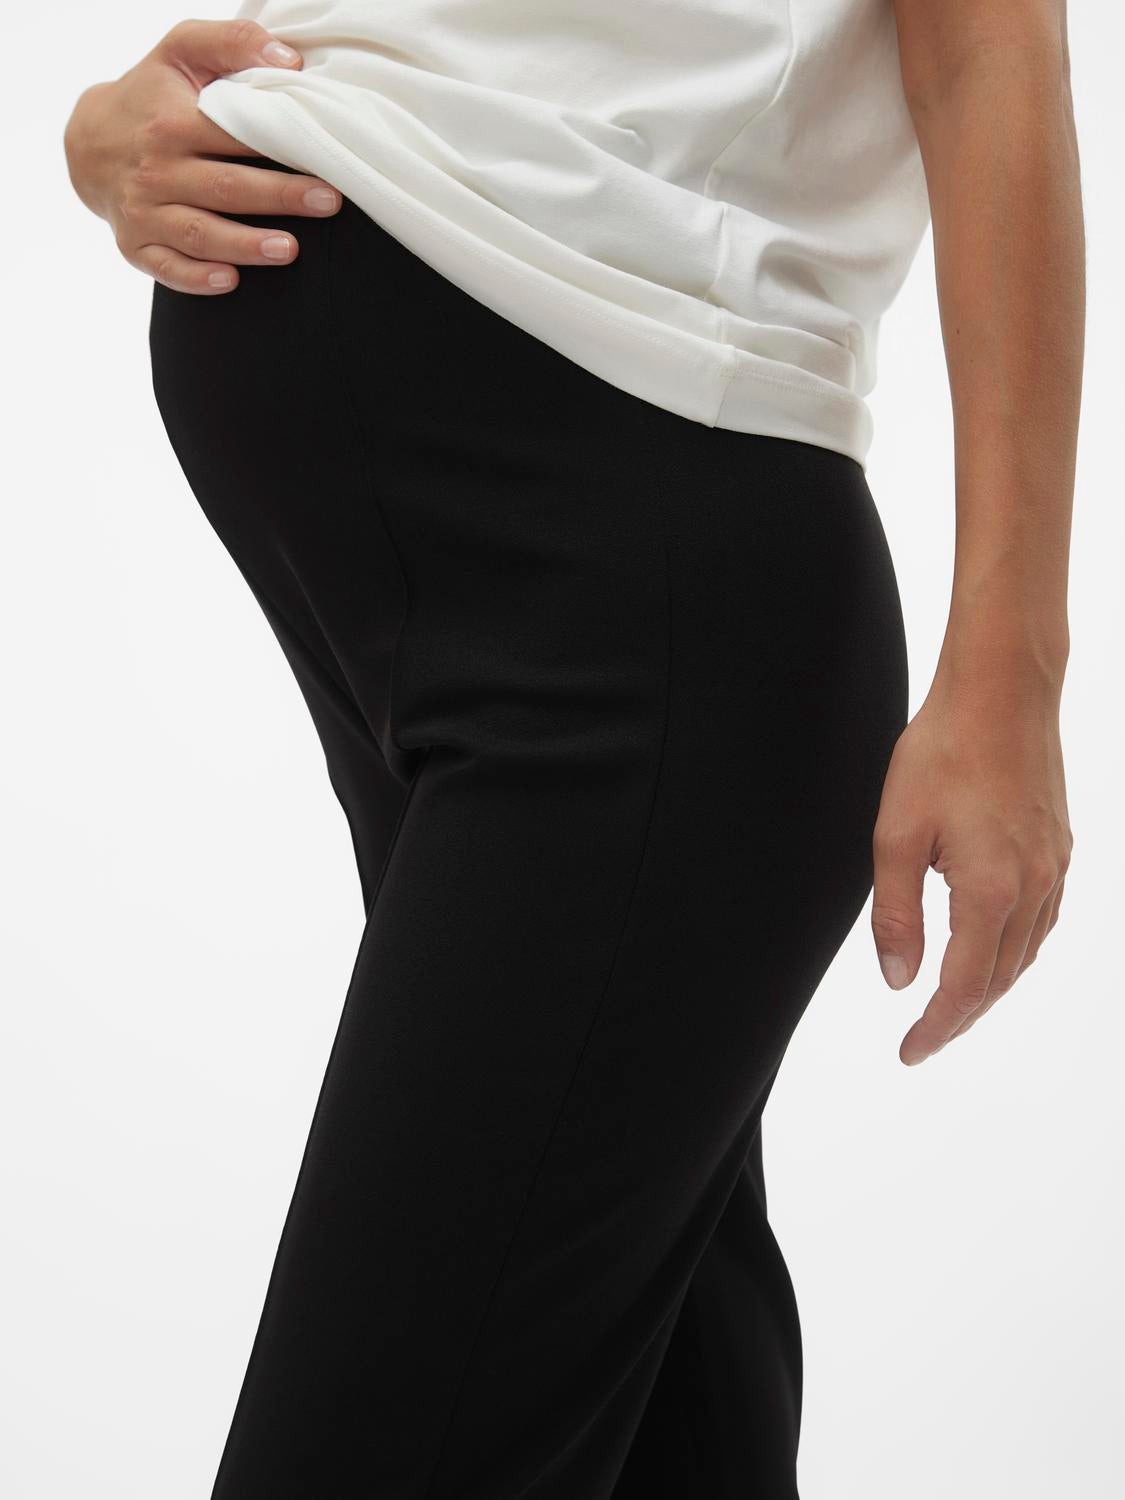 Women's Maternity Trousers & Tights. Nike IN